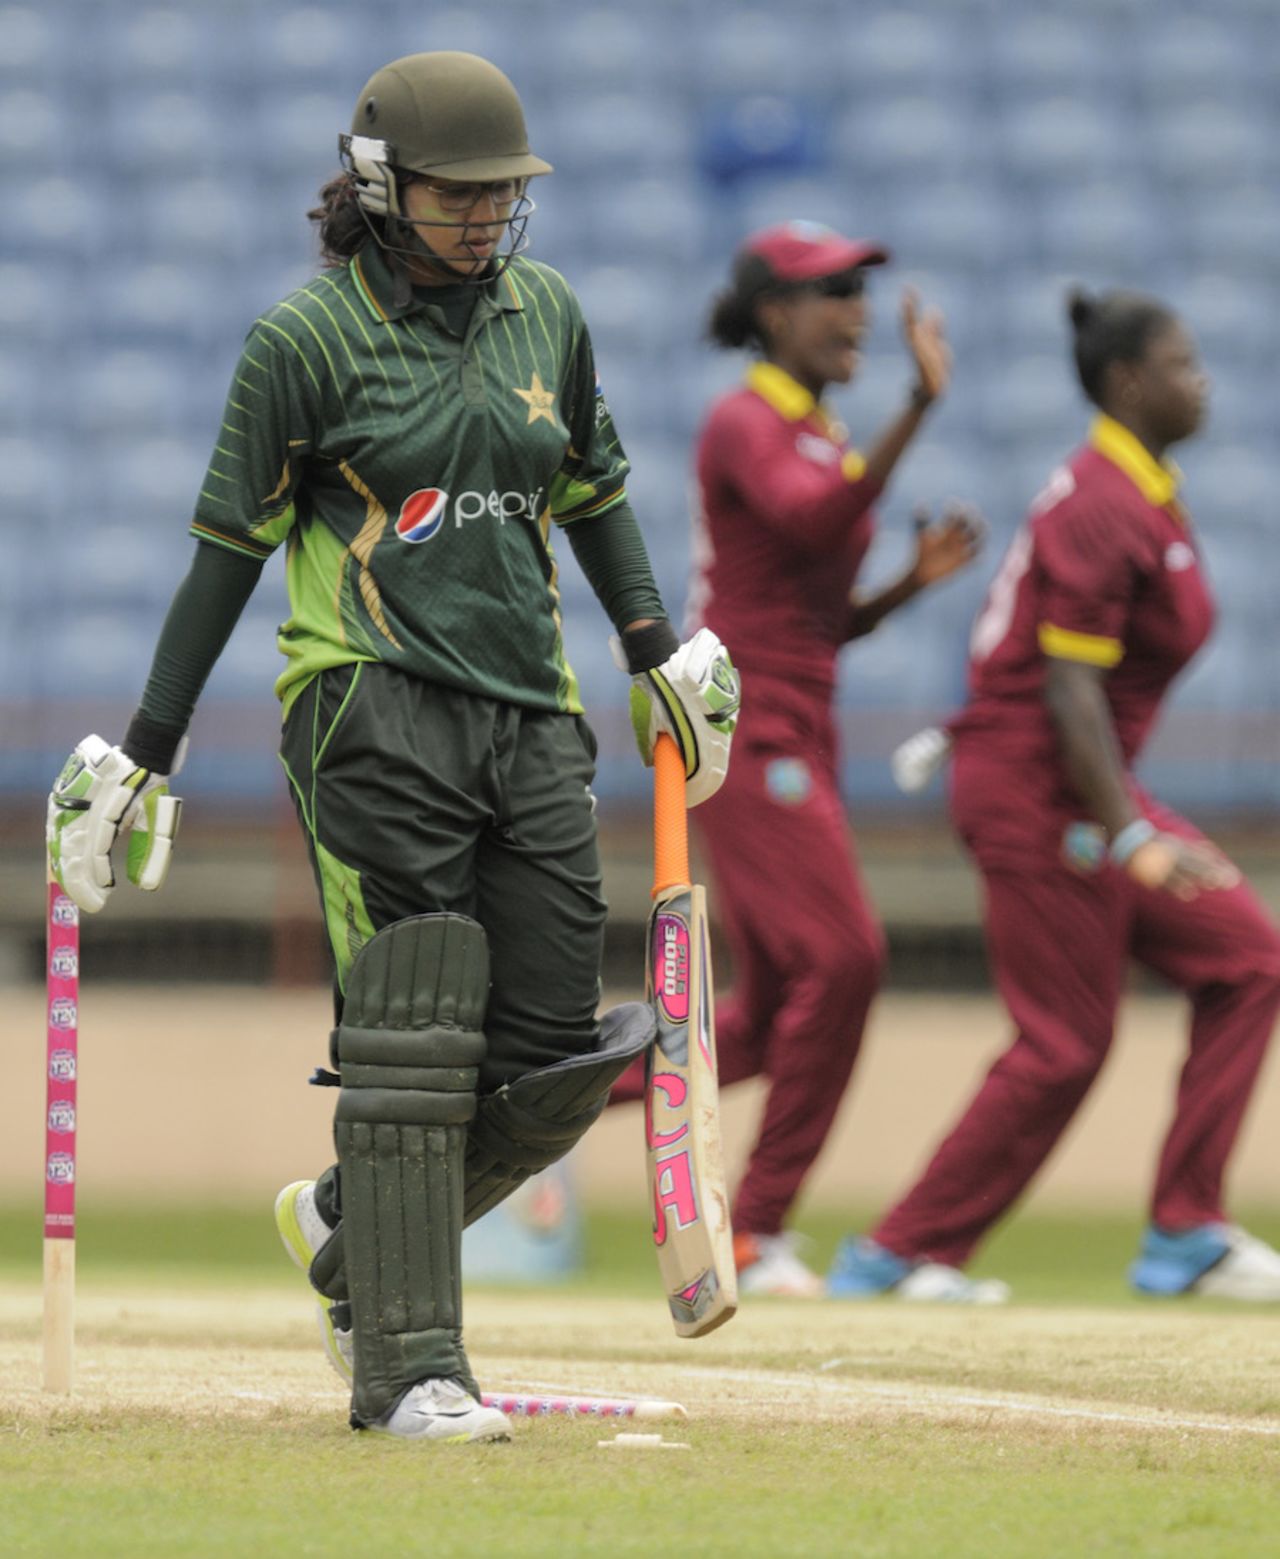 Ayesha Zafar lasted only three deliveries, West Indies v Pakistan, 1st women's T20, Grenada, October 29, 2015